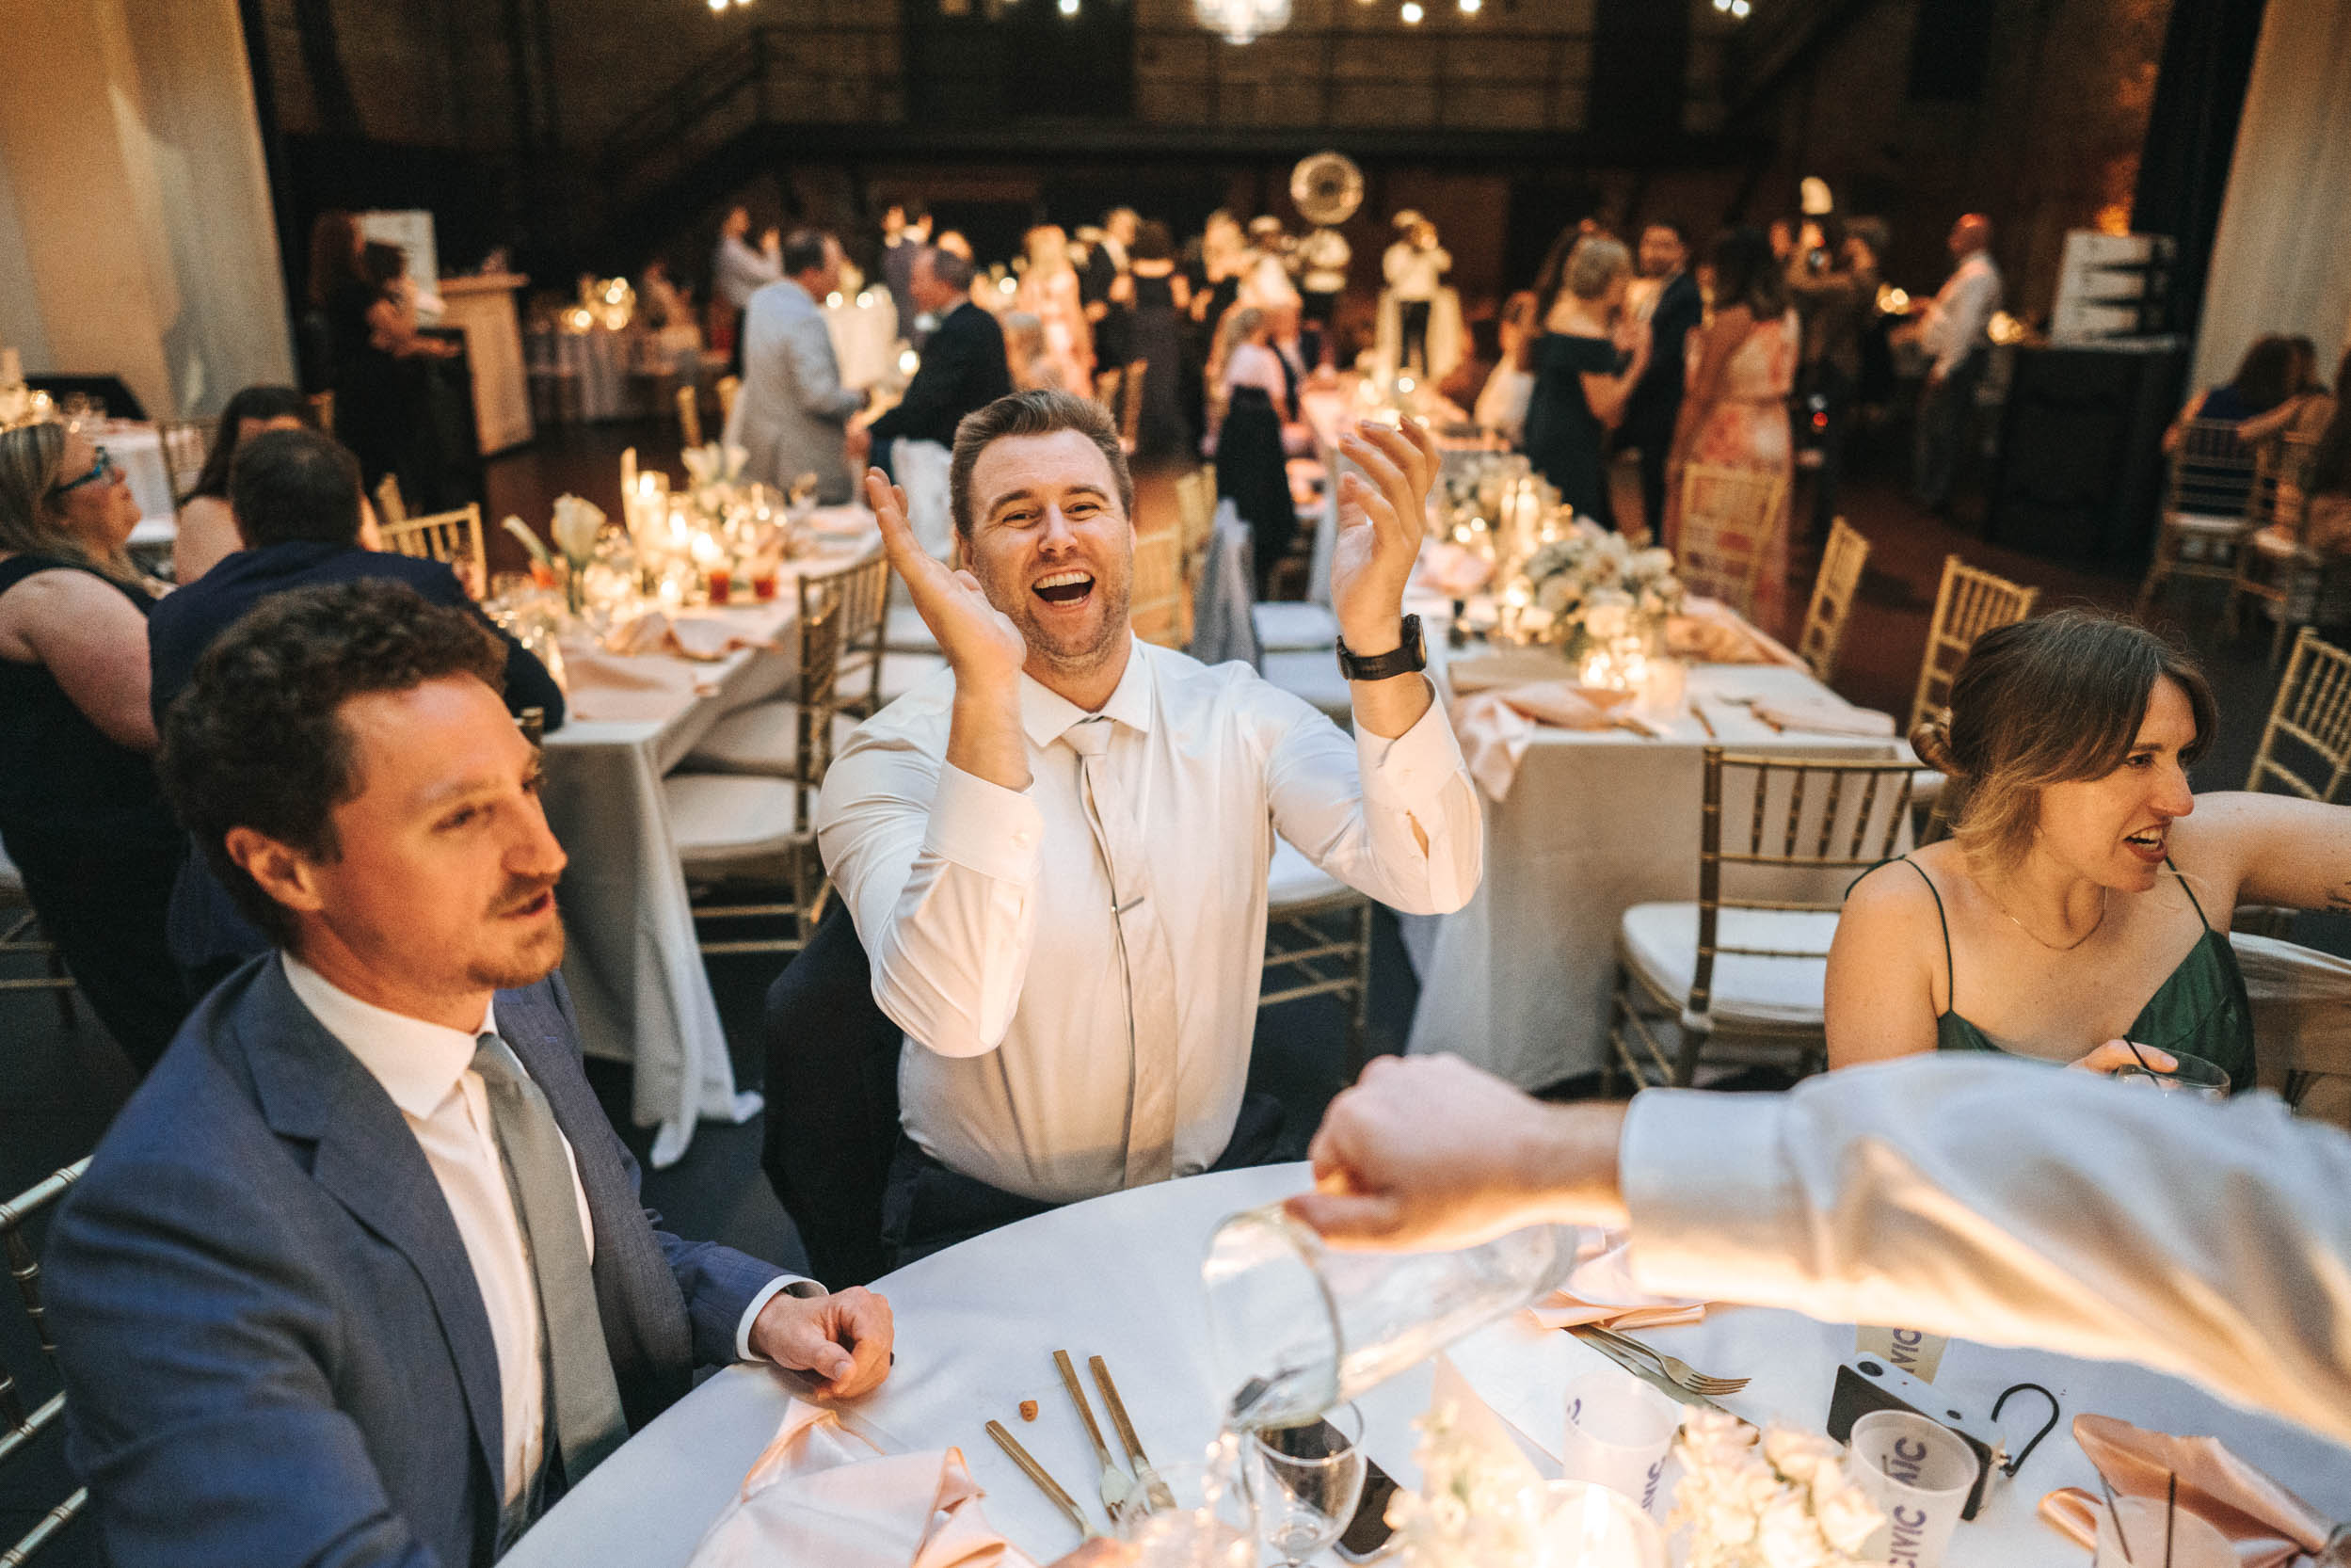 wedding guest laughing during reception at Civic Theater in New Orleans